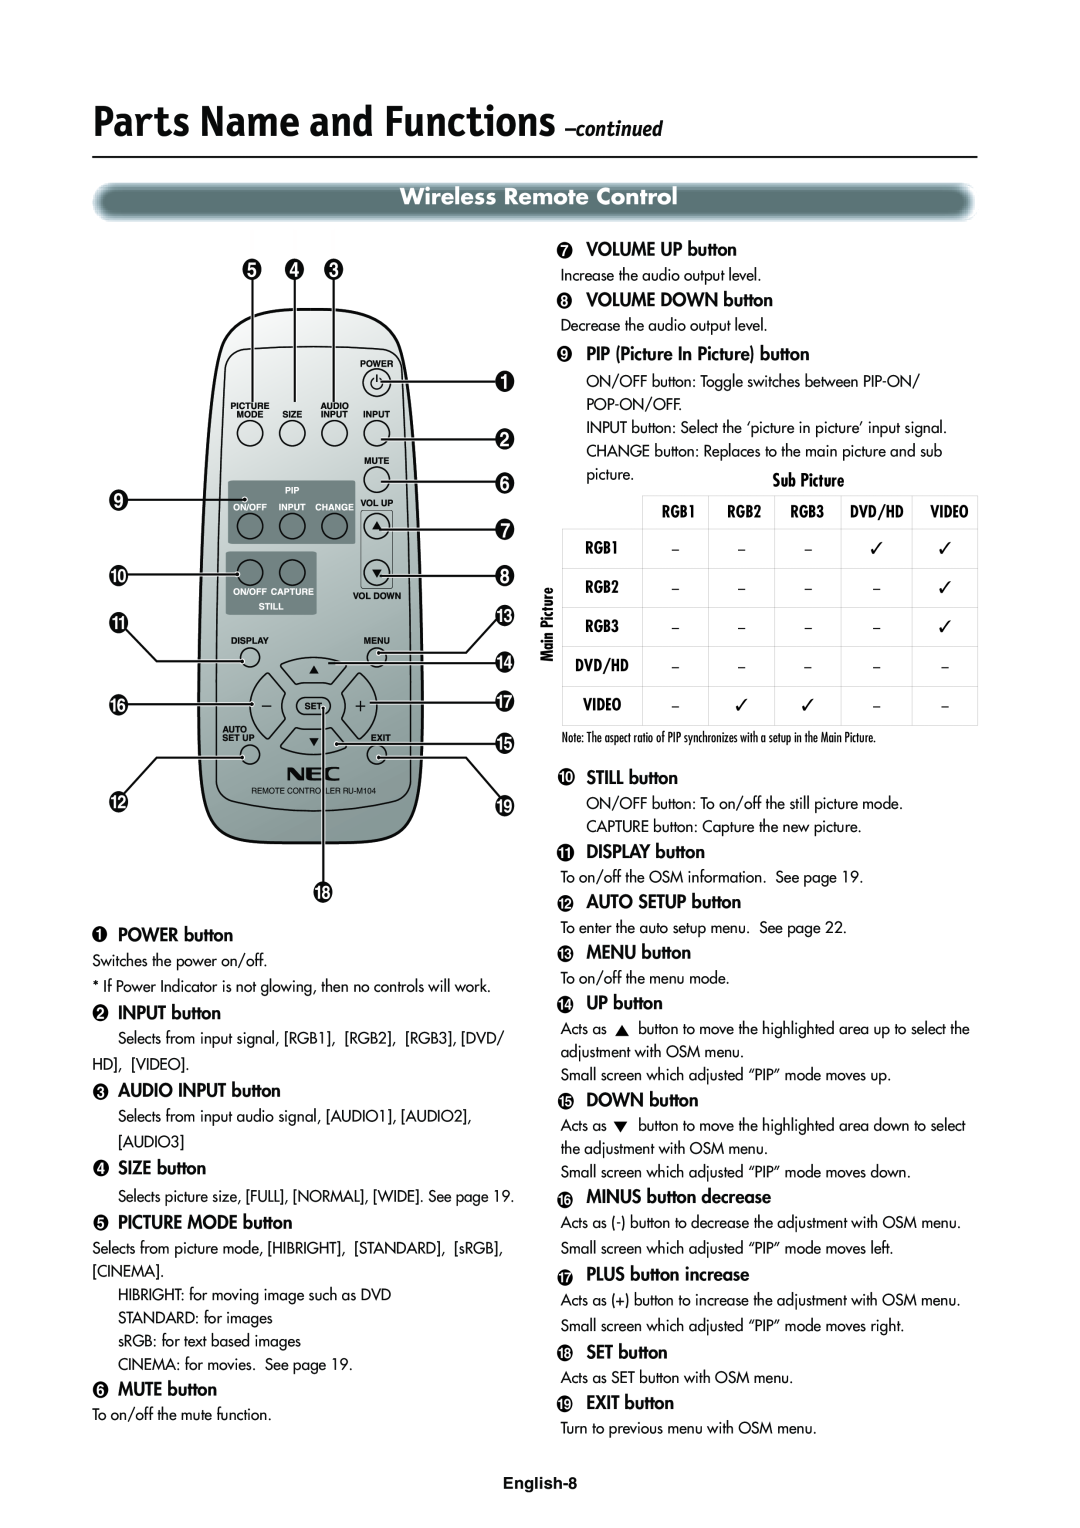 NEC LCD4000e manual Wireless Remote Control, Parts Name and Functions –continued 